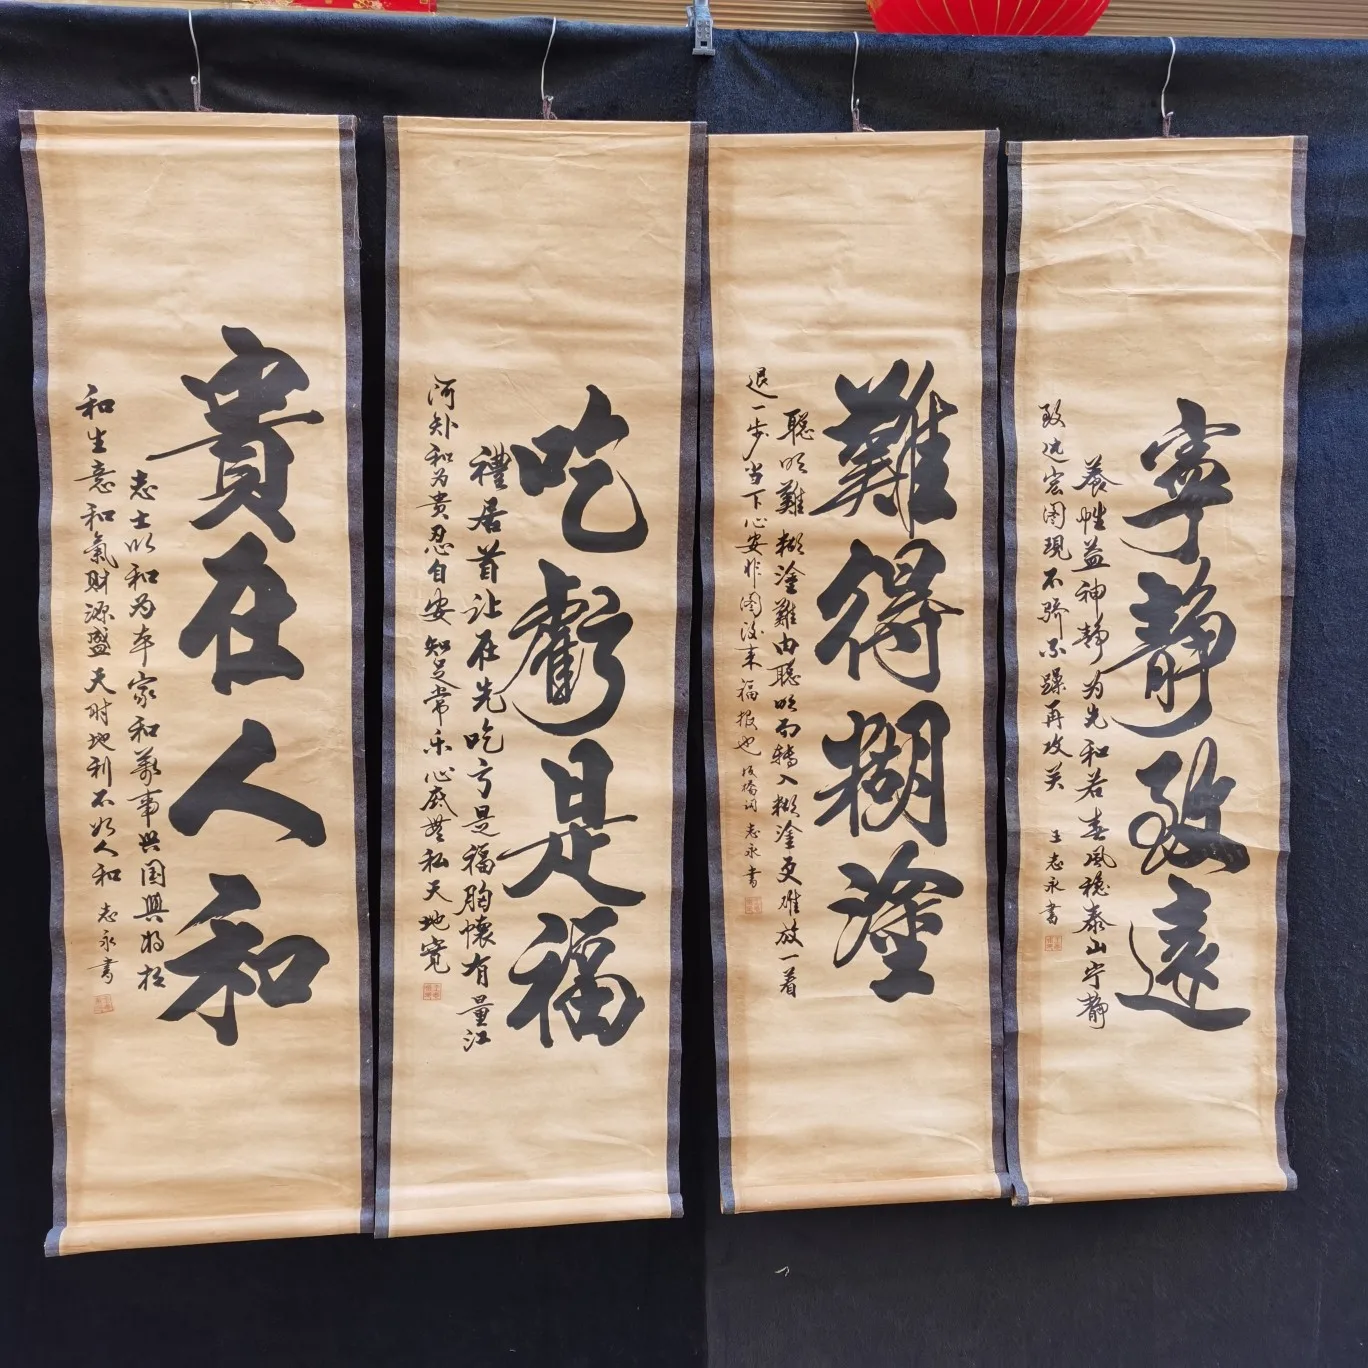 

China Collect Exquisite Central Scroll Four Calligraphy Word Paintings Handicraft Home Decoration